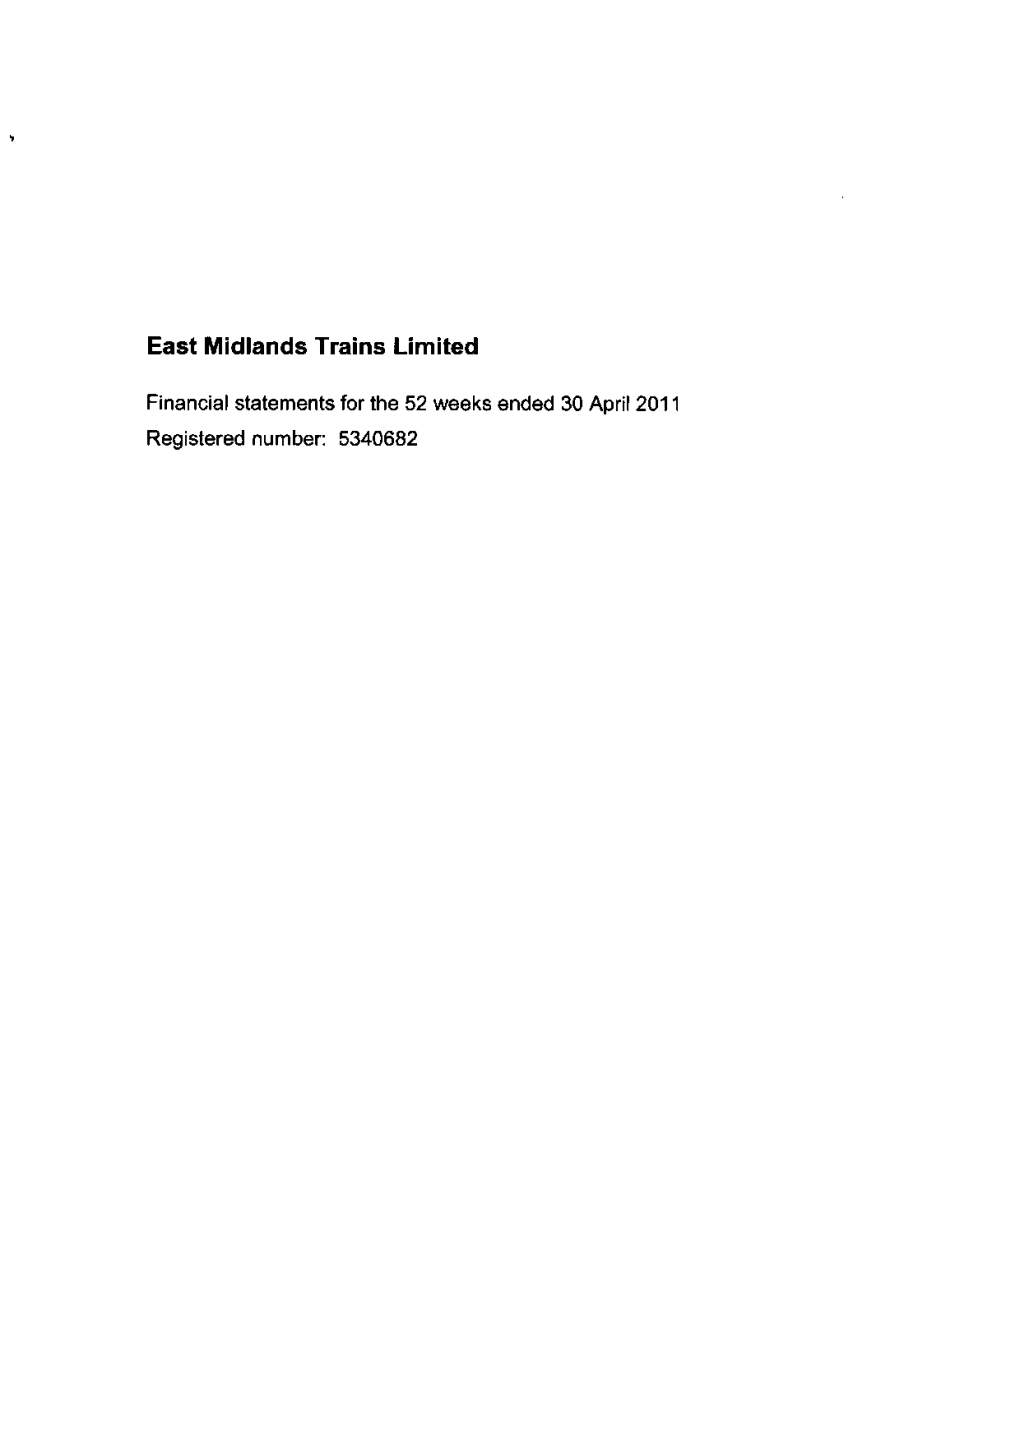 East Midlands Trains Limited Directors' Report and Accounts 2011